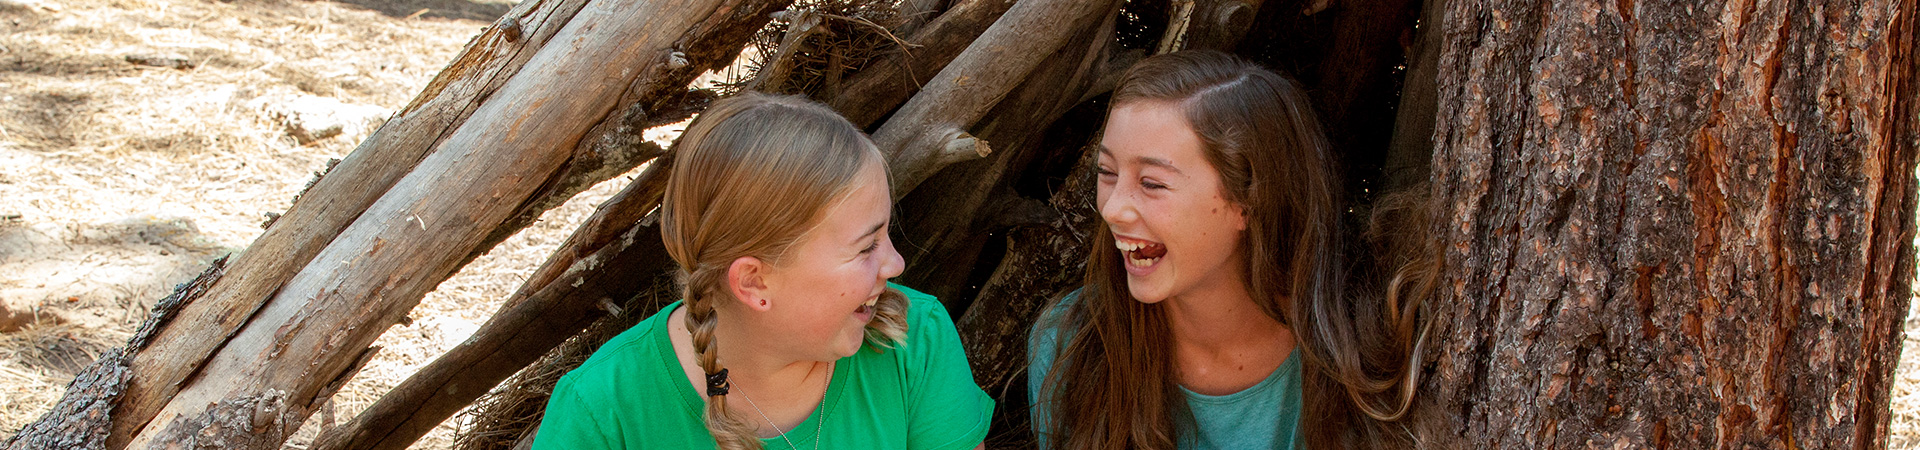  two girl scouts laughing while sitting outdoors 